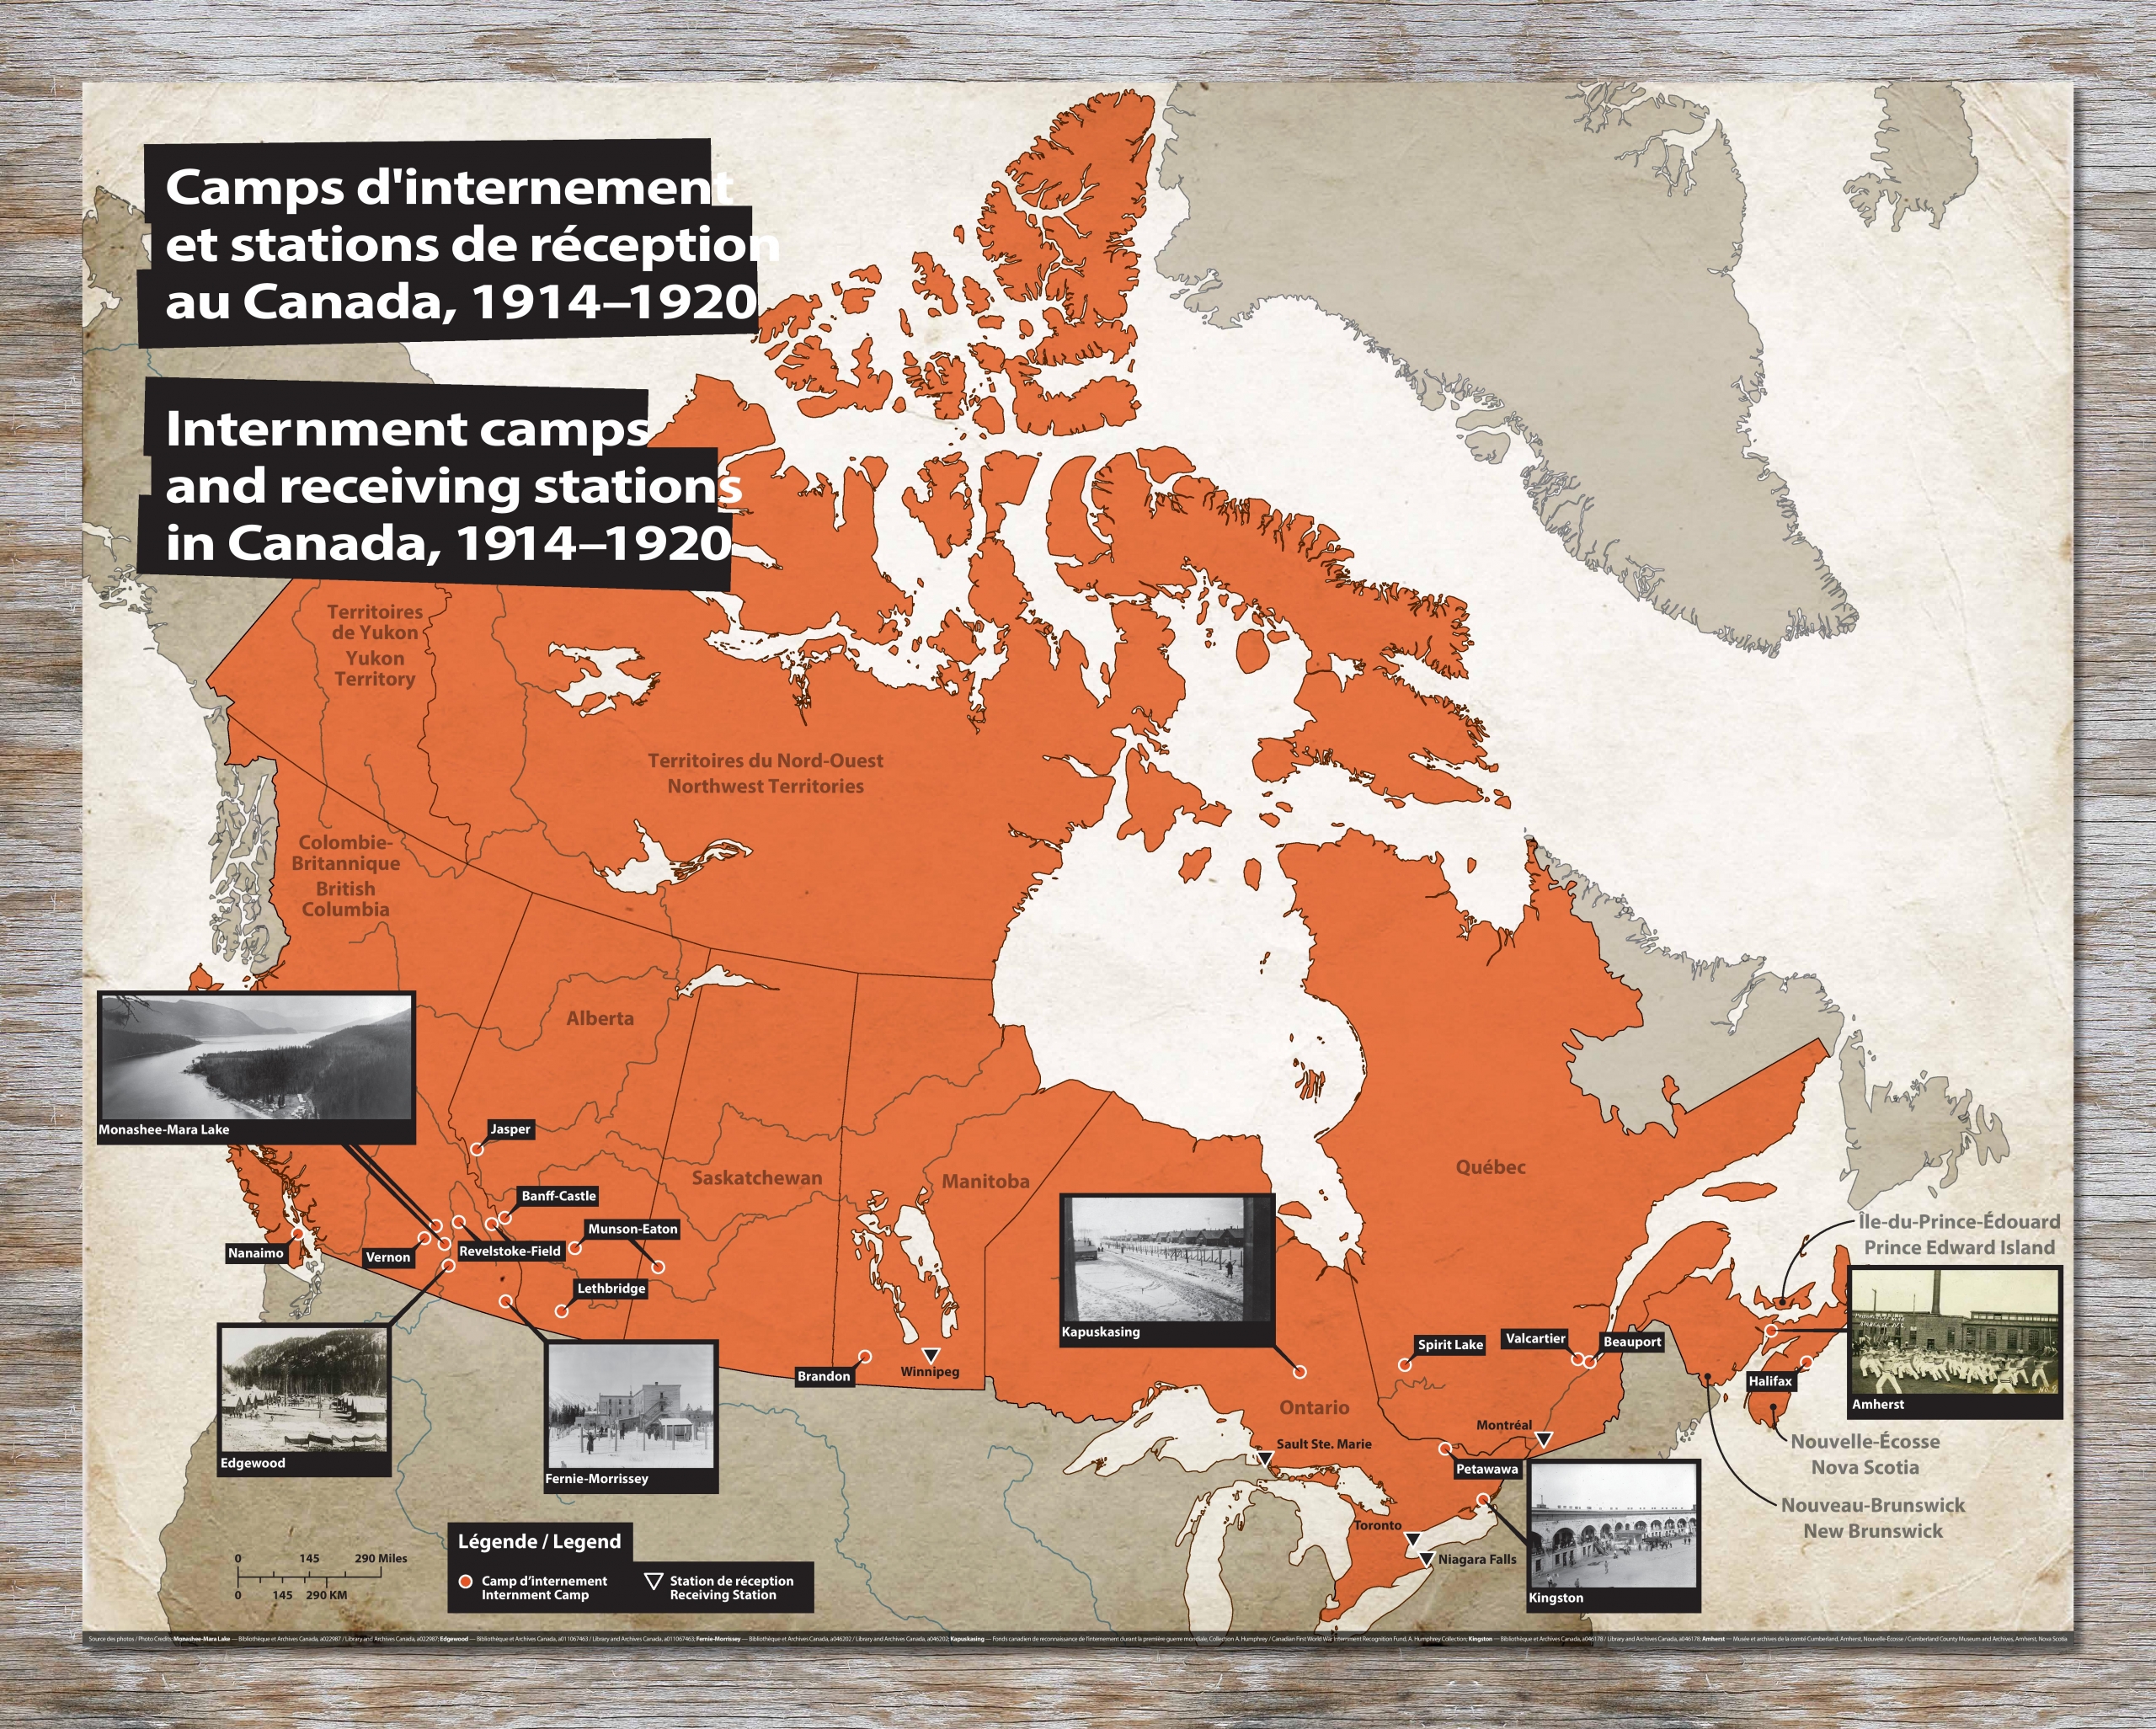 Map of Canada depicting locations of internment camps during the First World War.